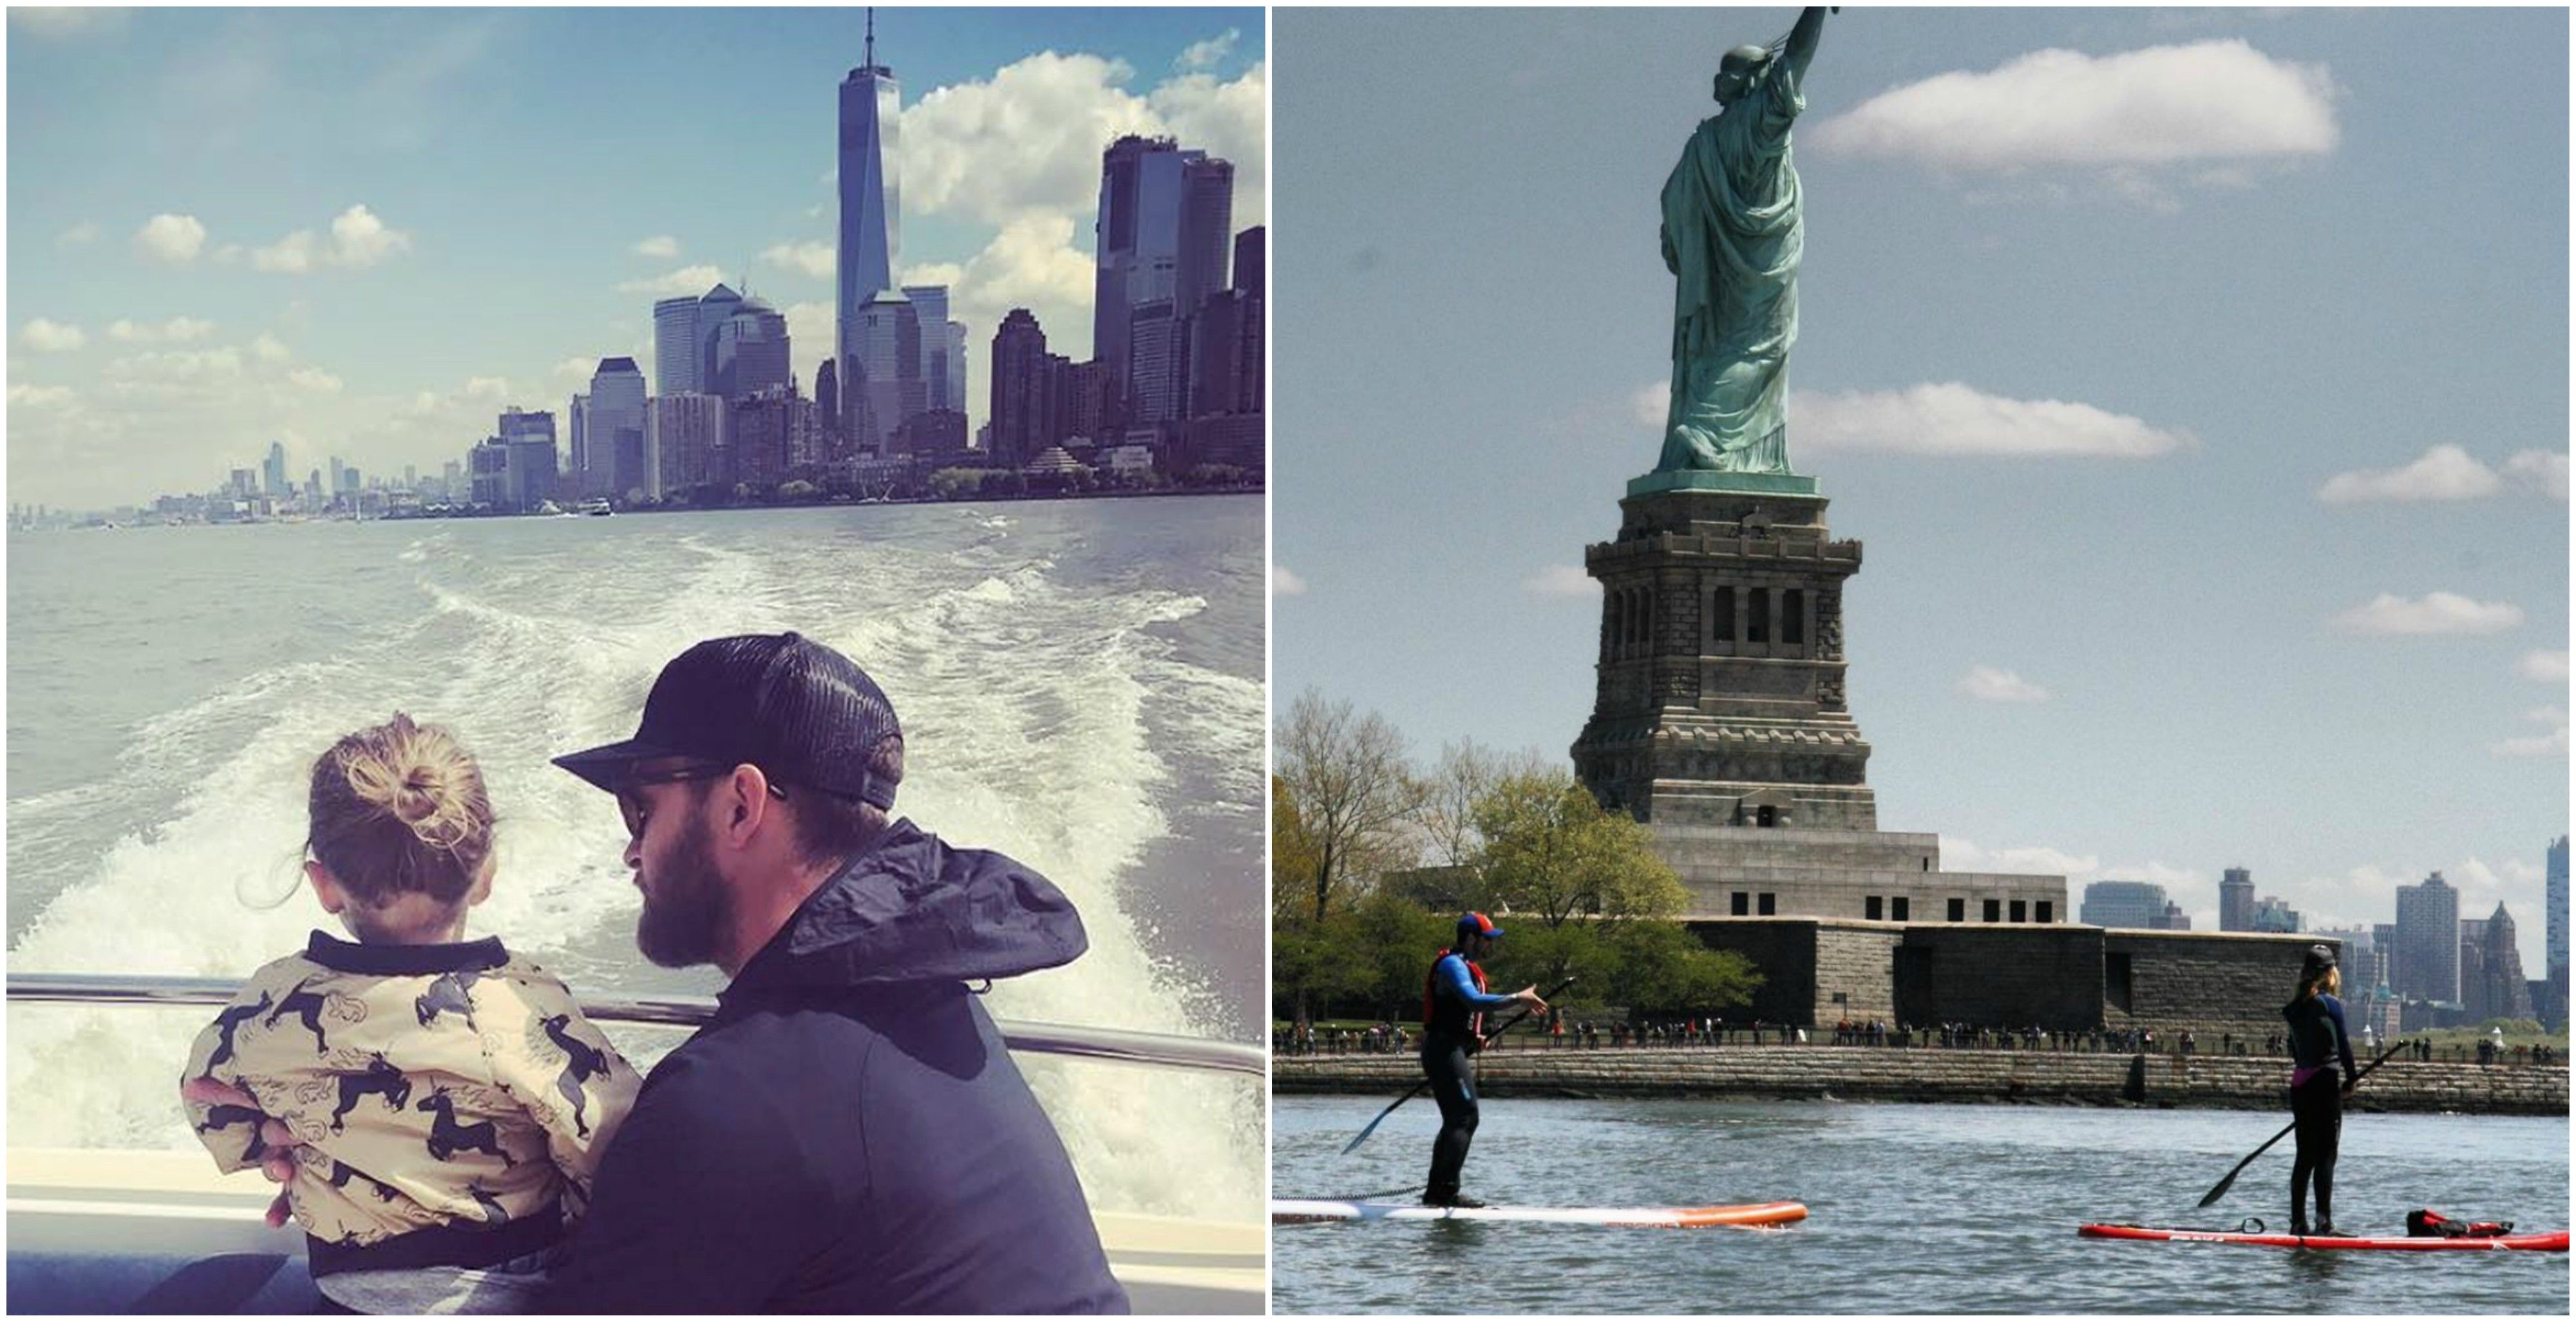 Justin Timberlake with son on Hudson River in New York